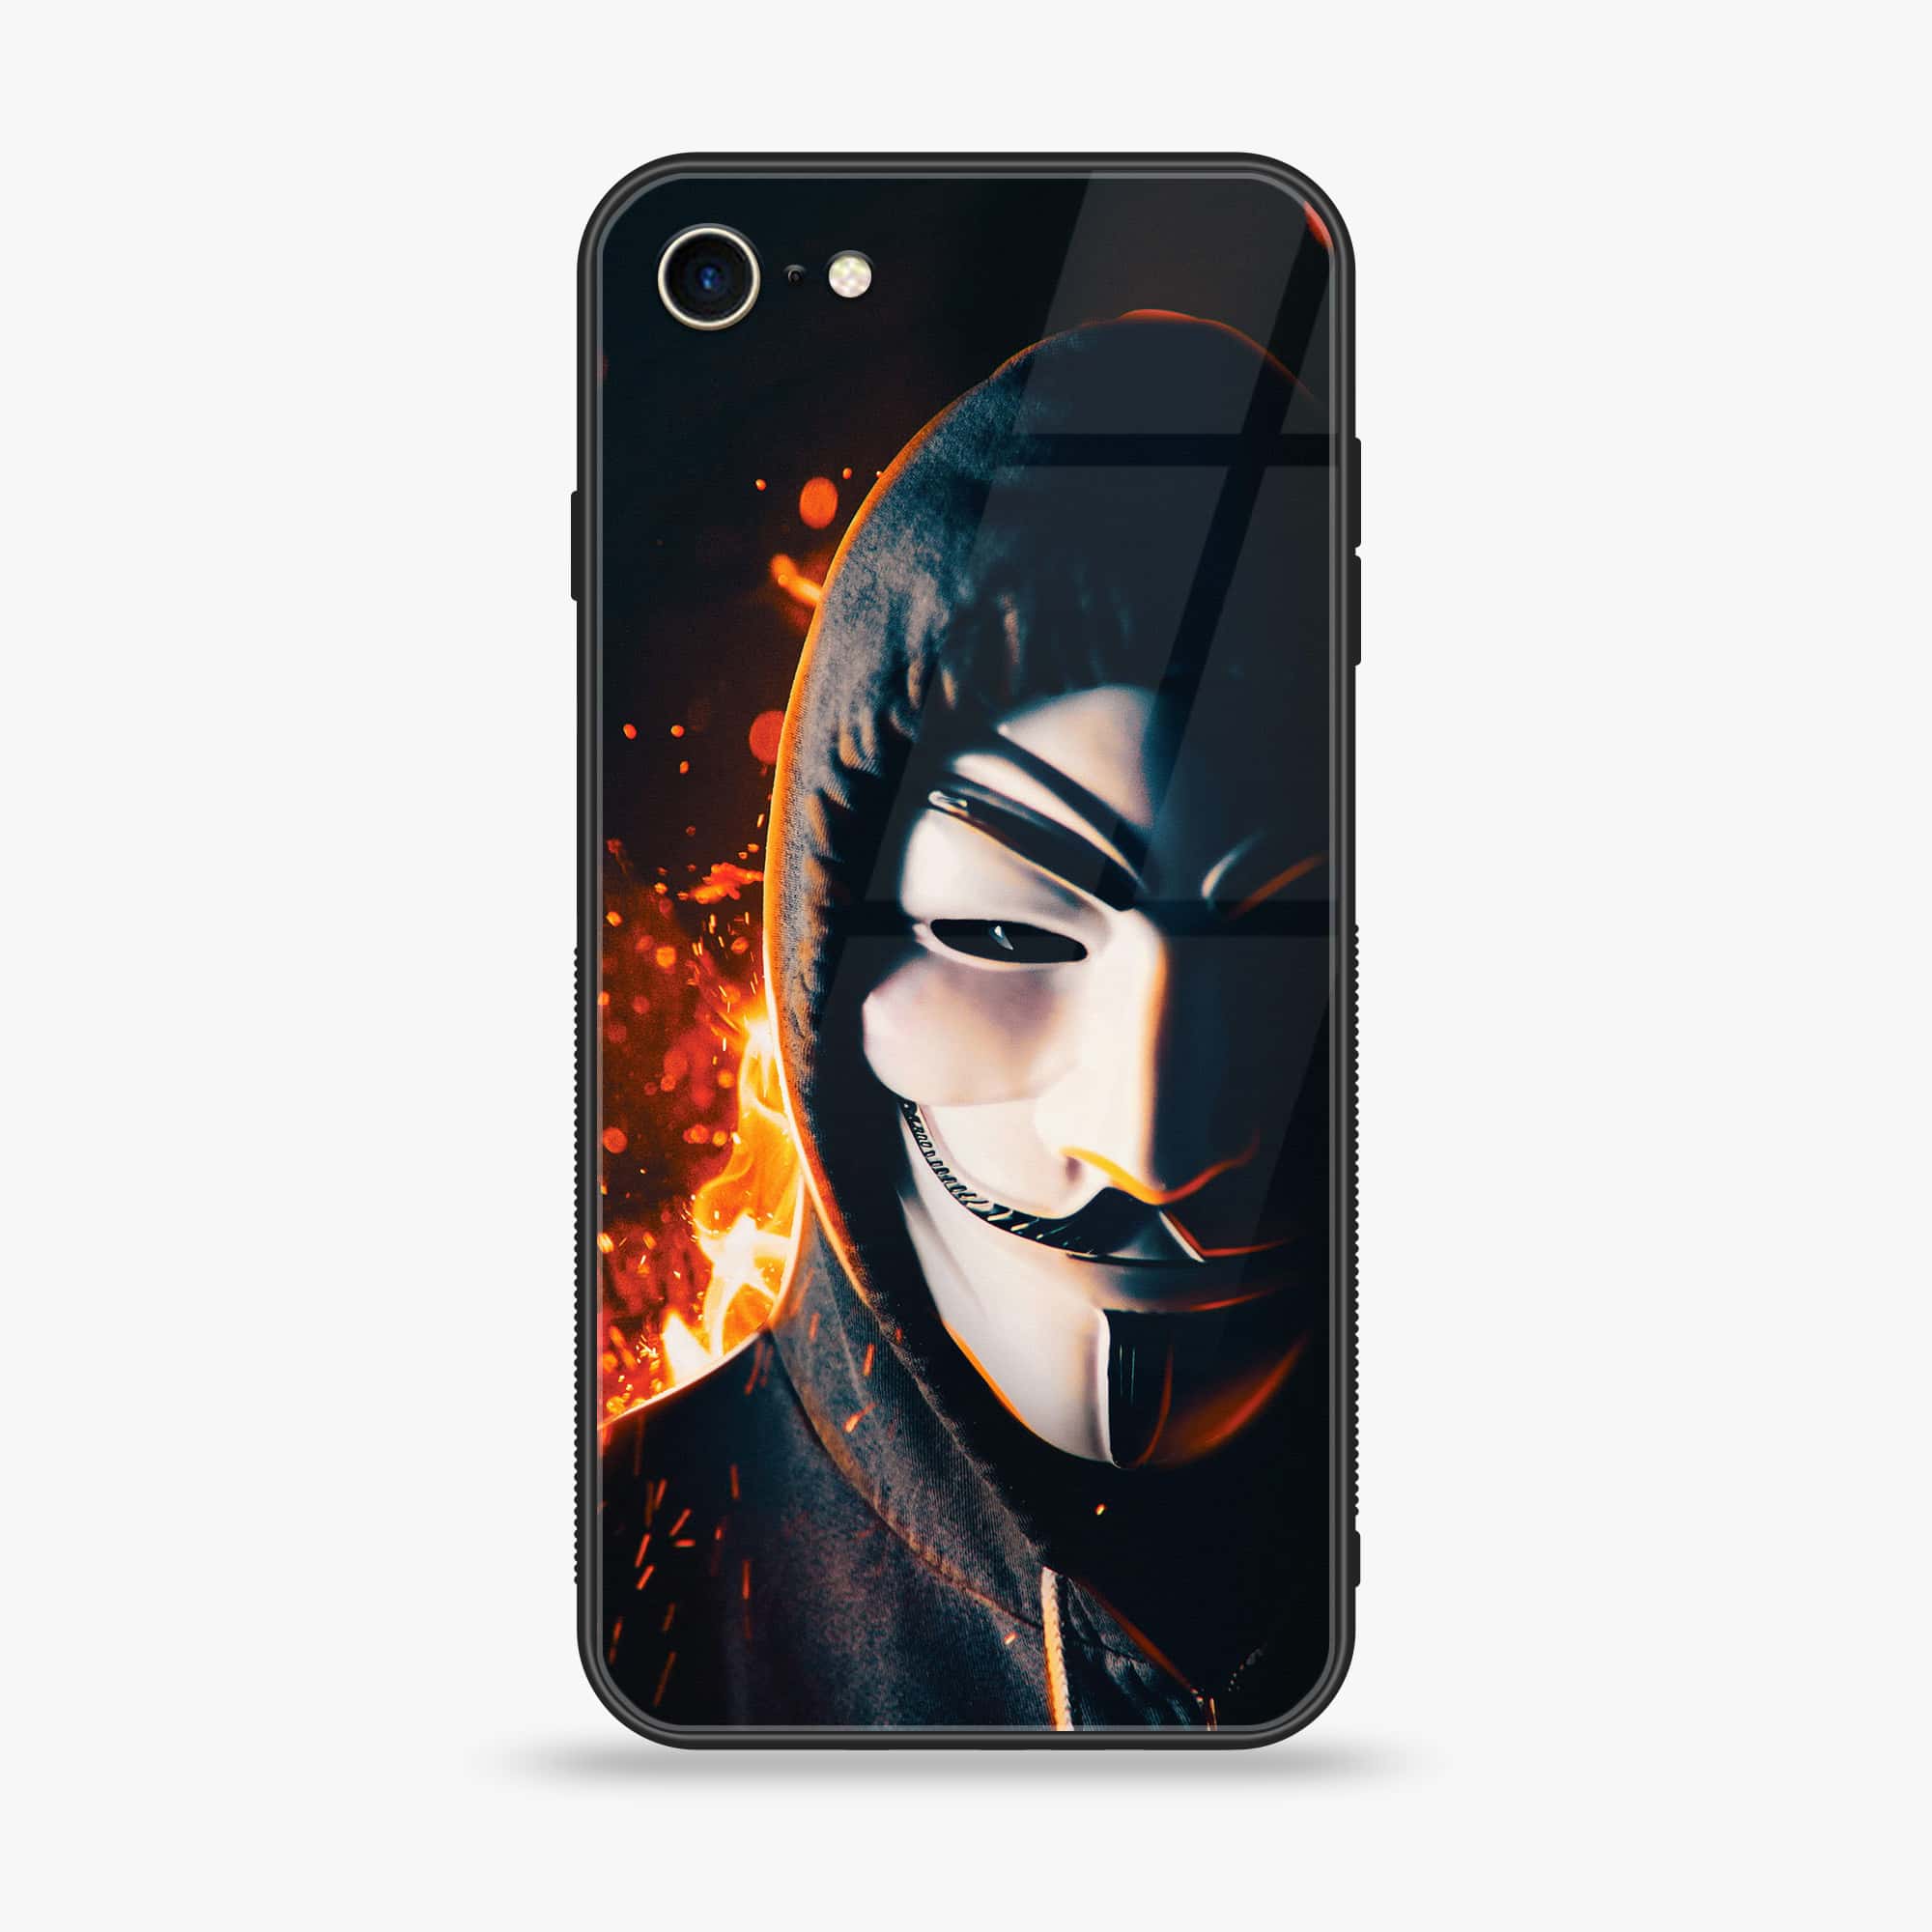 iPhone 7 - Anonymous 2.0 Series - Premium Printed Glass soft Bumper shock Proof Case